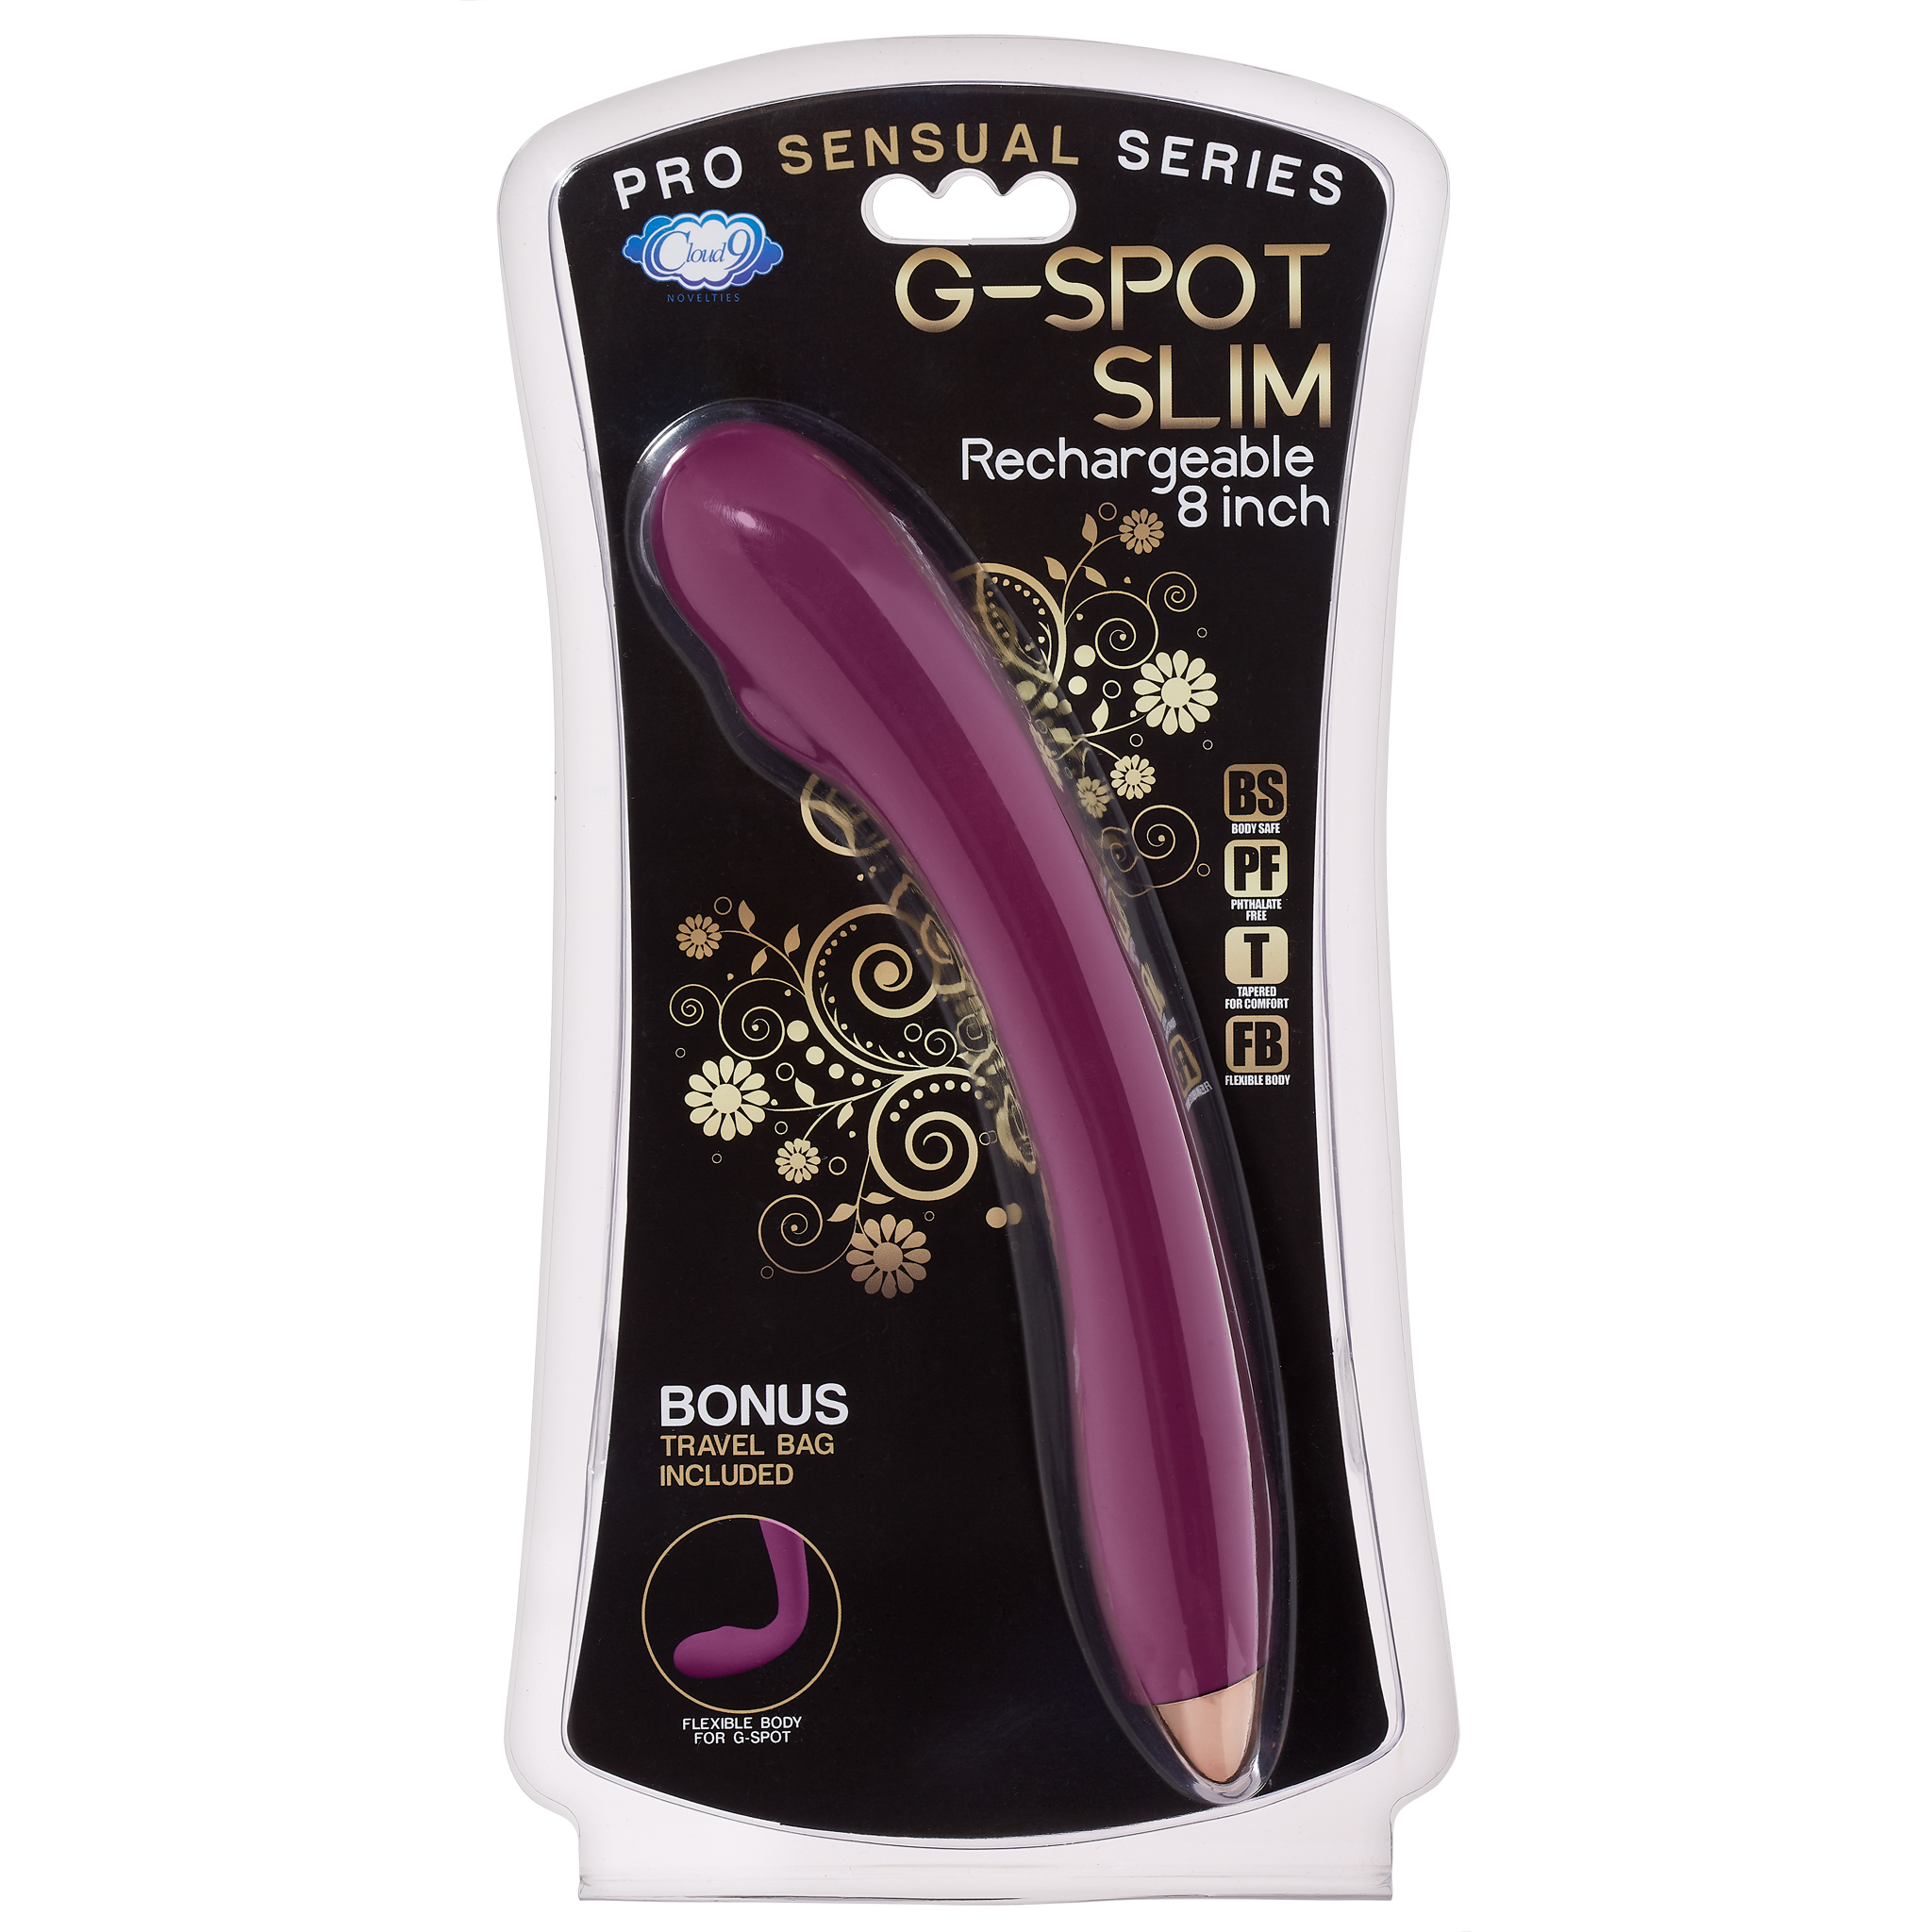 CLOUD 9 RECHARGEABLE G-SPOT SLIM 8IN SINGLE MOTOR PLUM - Click Image to Close